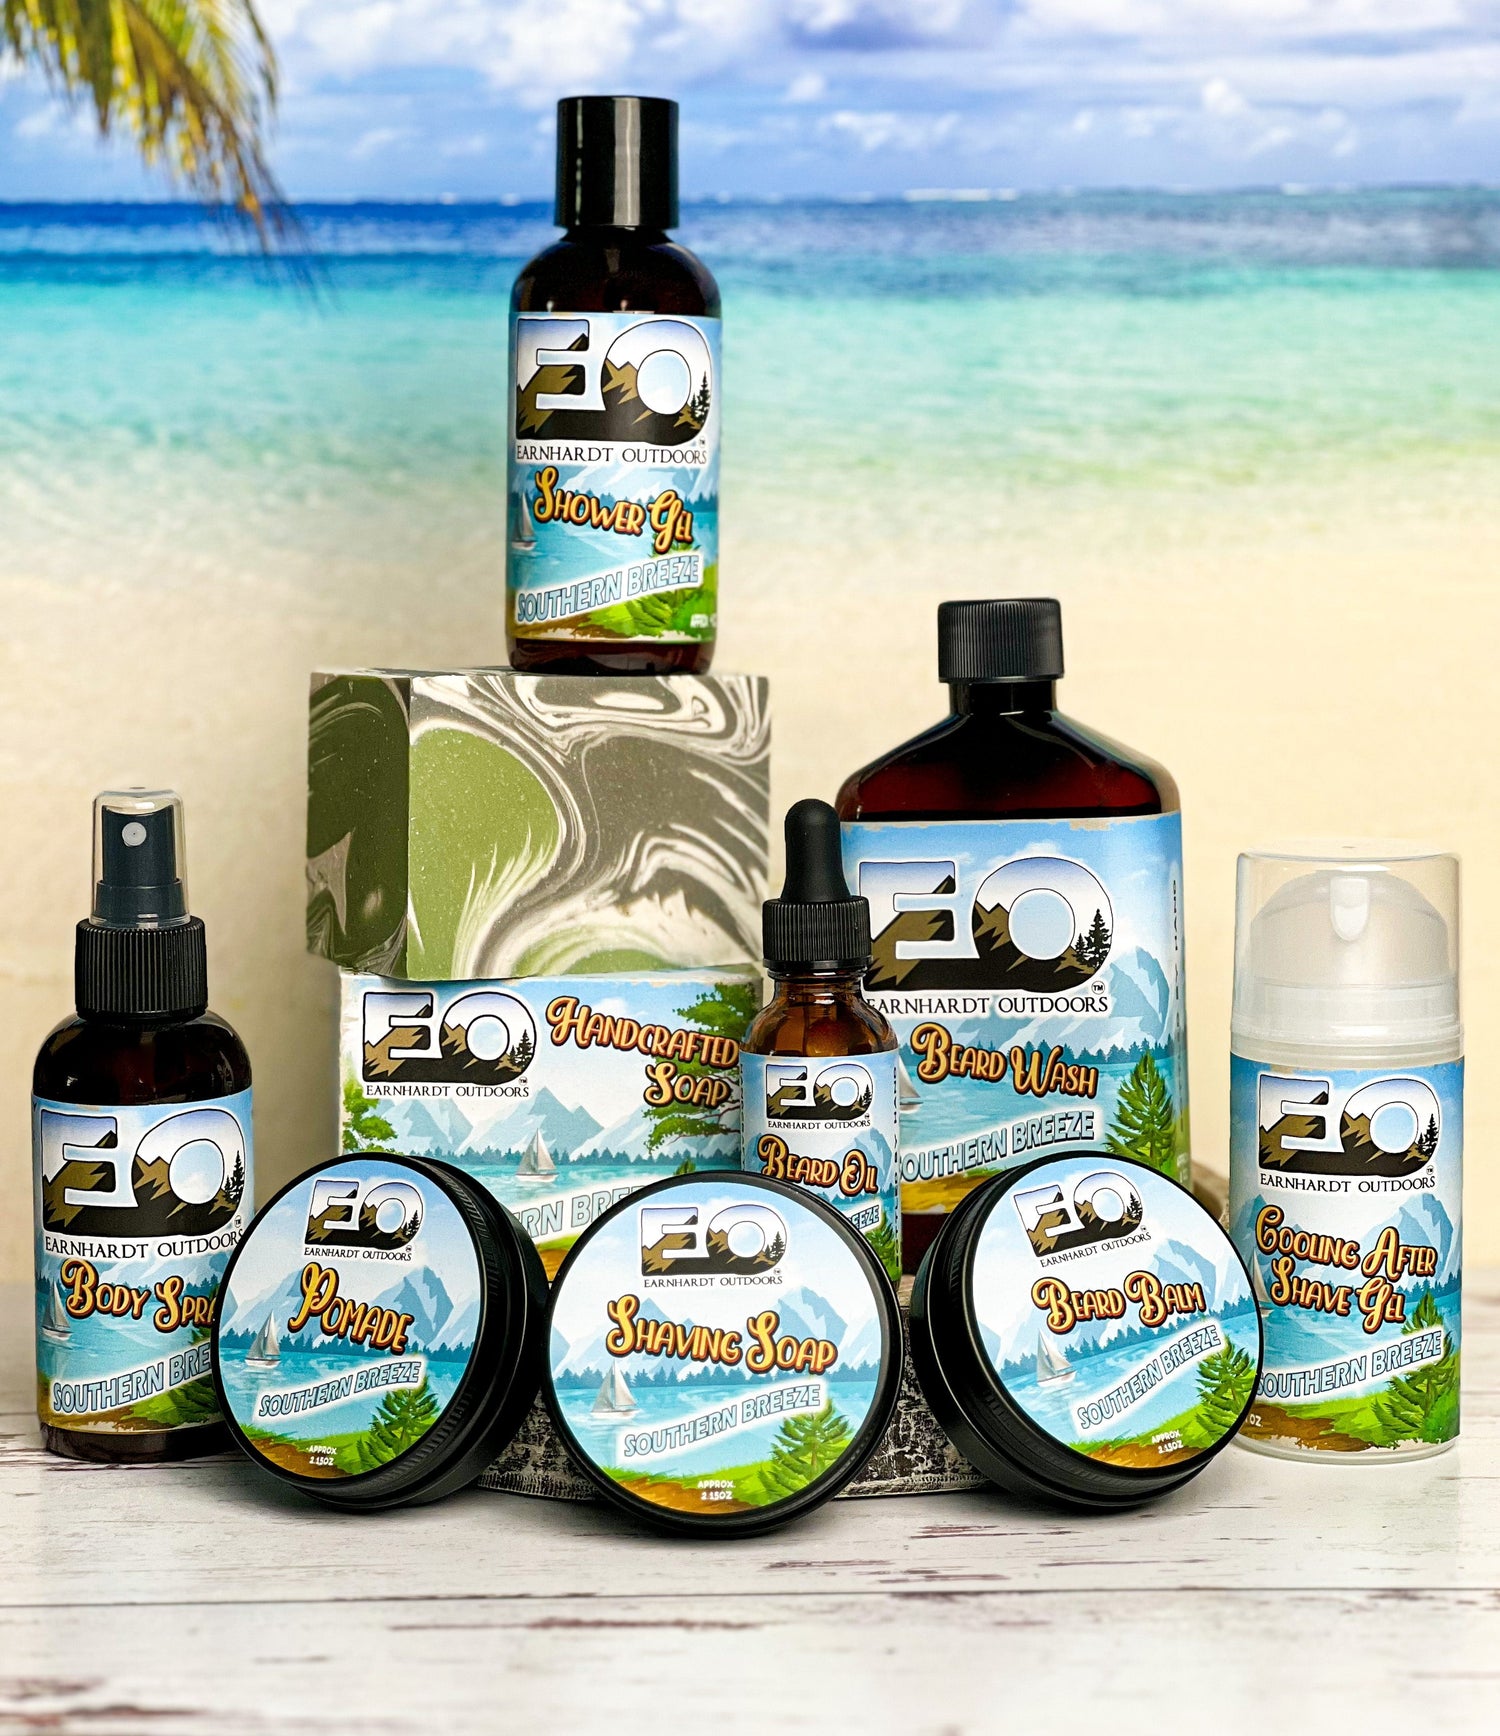 Southern Breeze Earnhardt Outdoors After Shave - Old Town Soap Co.